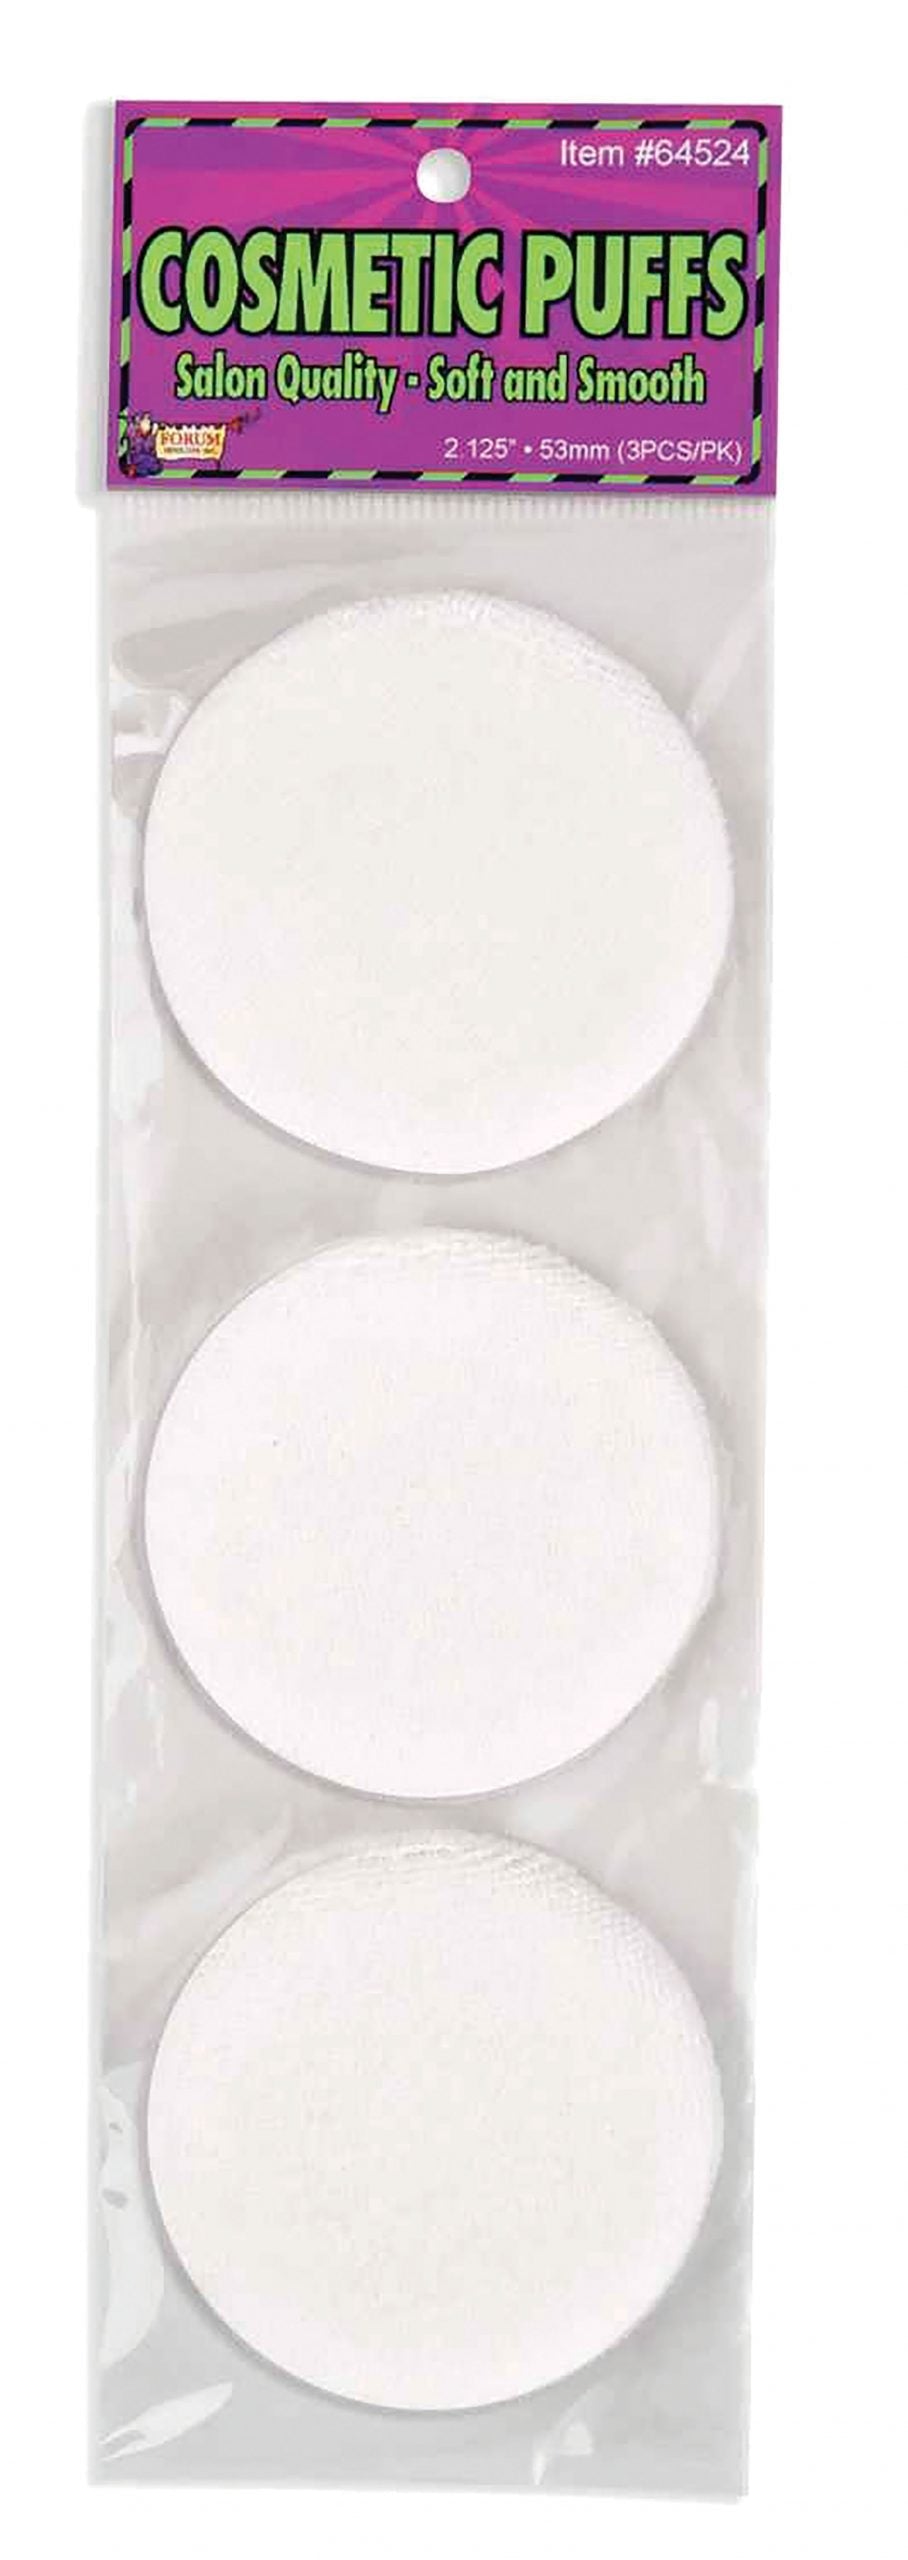 Cosmetic Puffs 3 In Pkt White Make Up Unisex_1